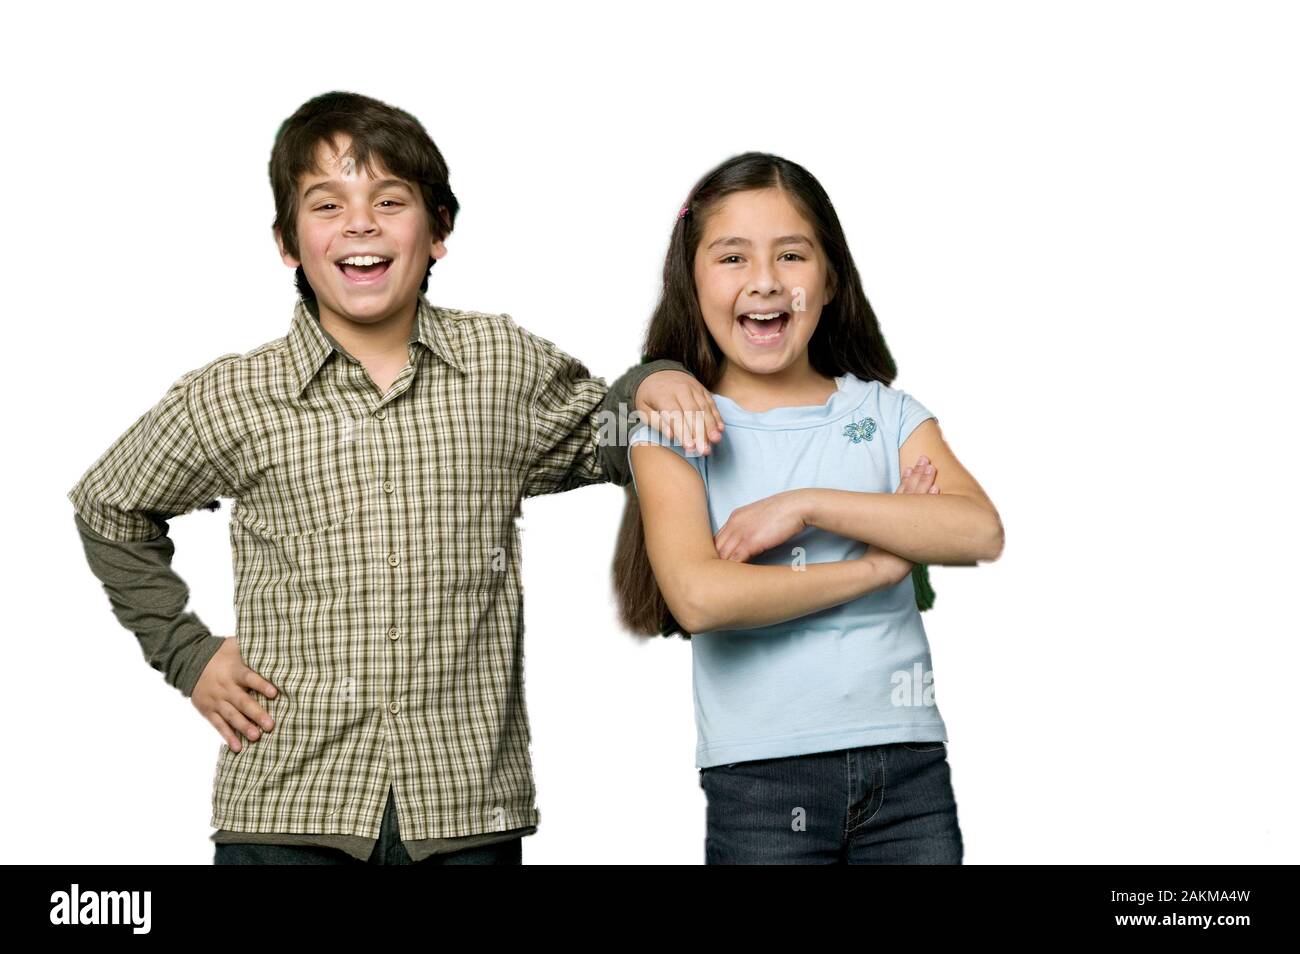 Young Caucasian boy and girl best friends portrait on a white background Stock Photo